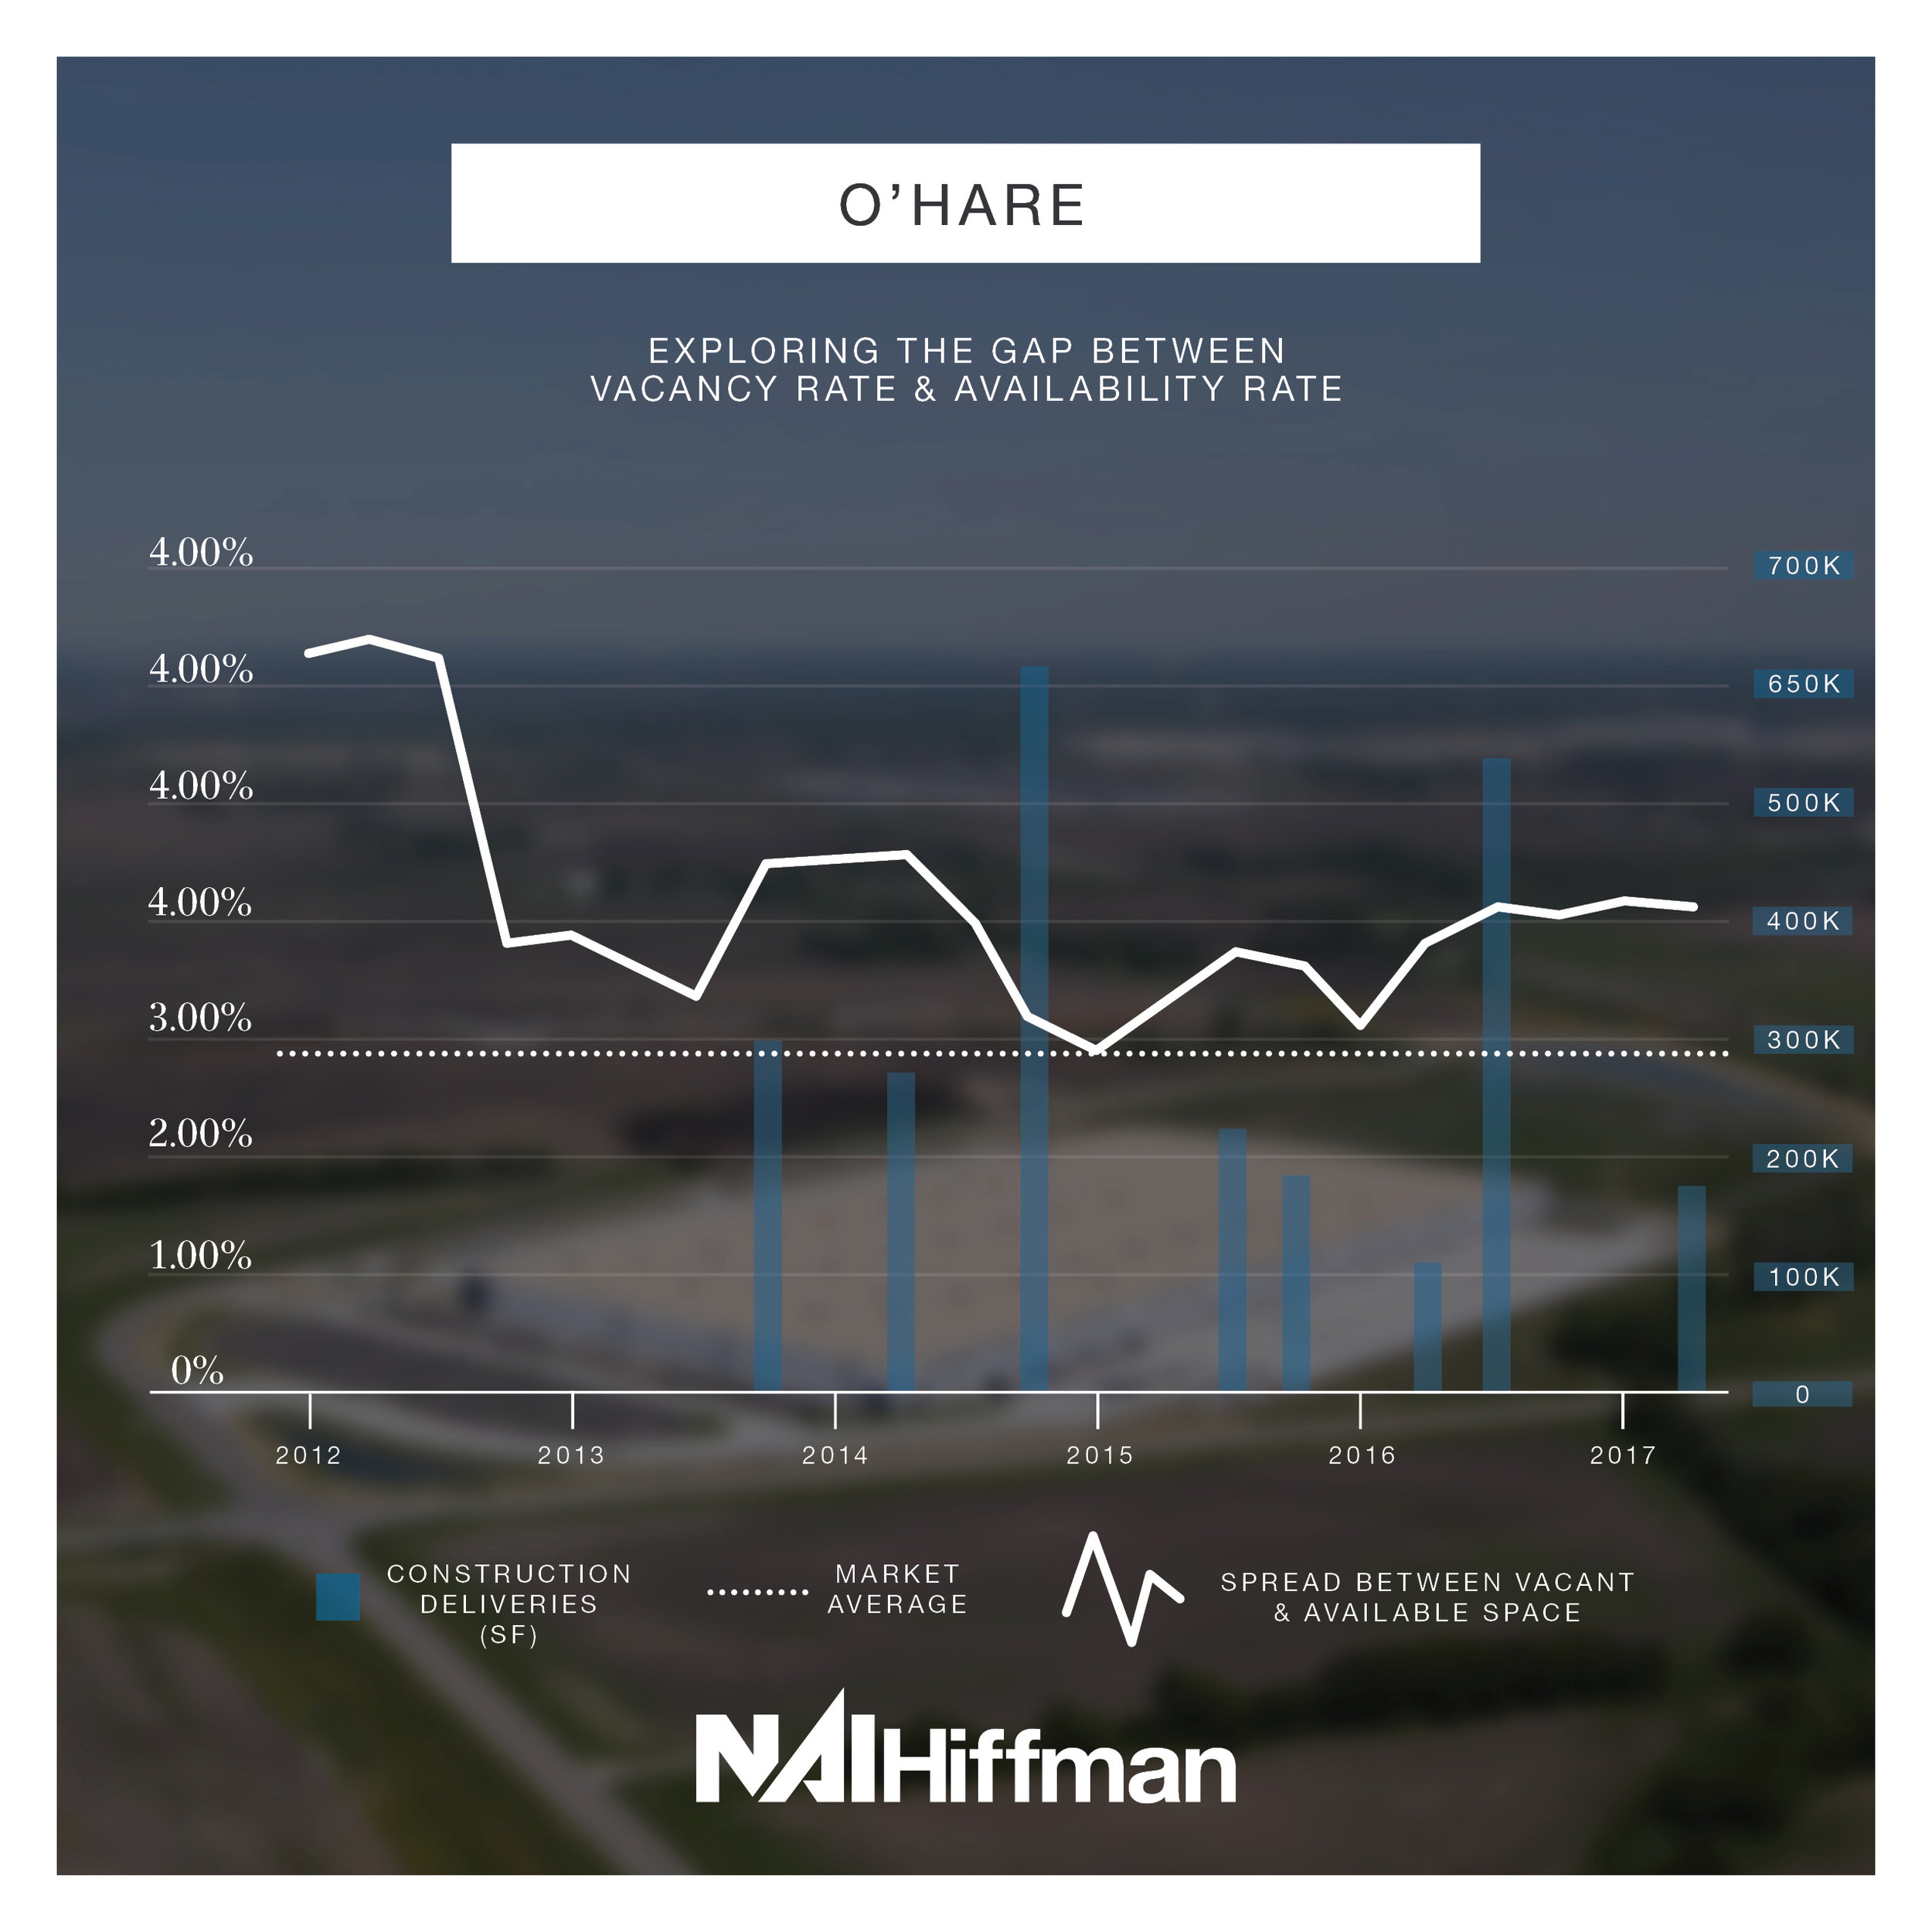   O'Hare  - The O’Hare submarket spread has remained above the market average since the beginning of 2012. Even with strong leasing activity, the amount of functionally obsolete space in the submarket keeps the availability rate high. 